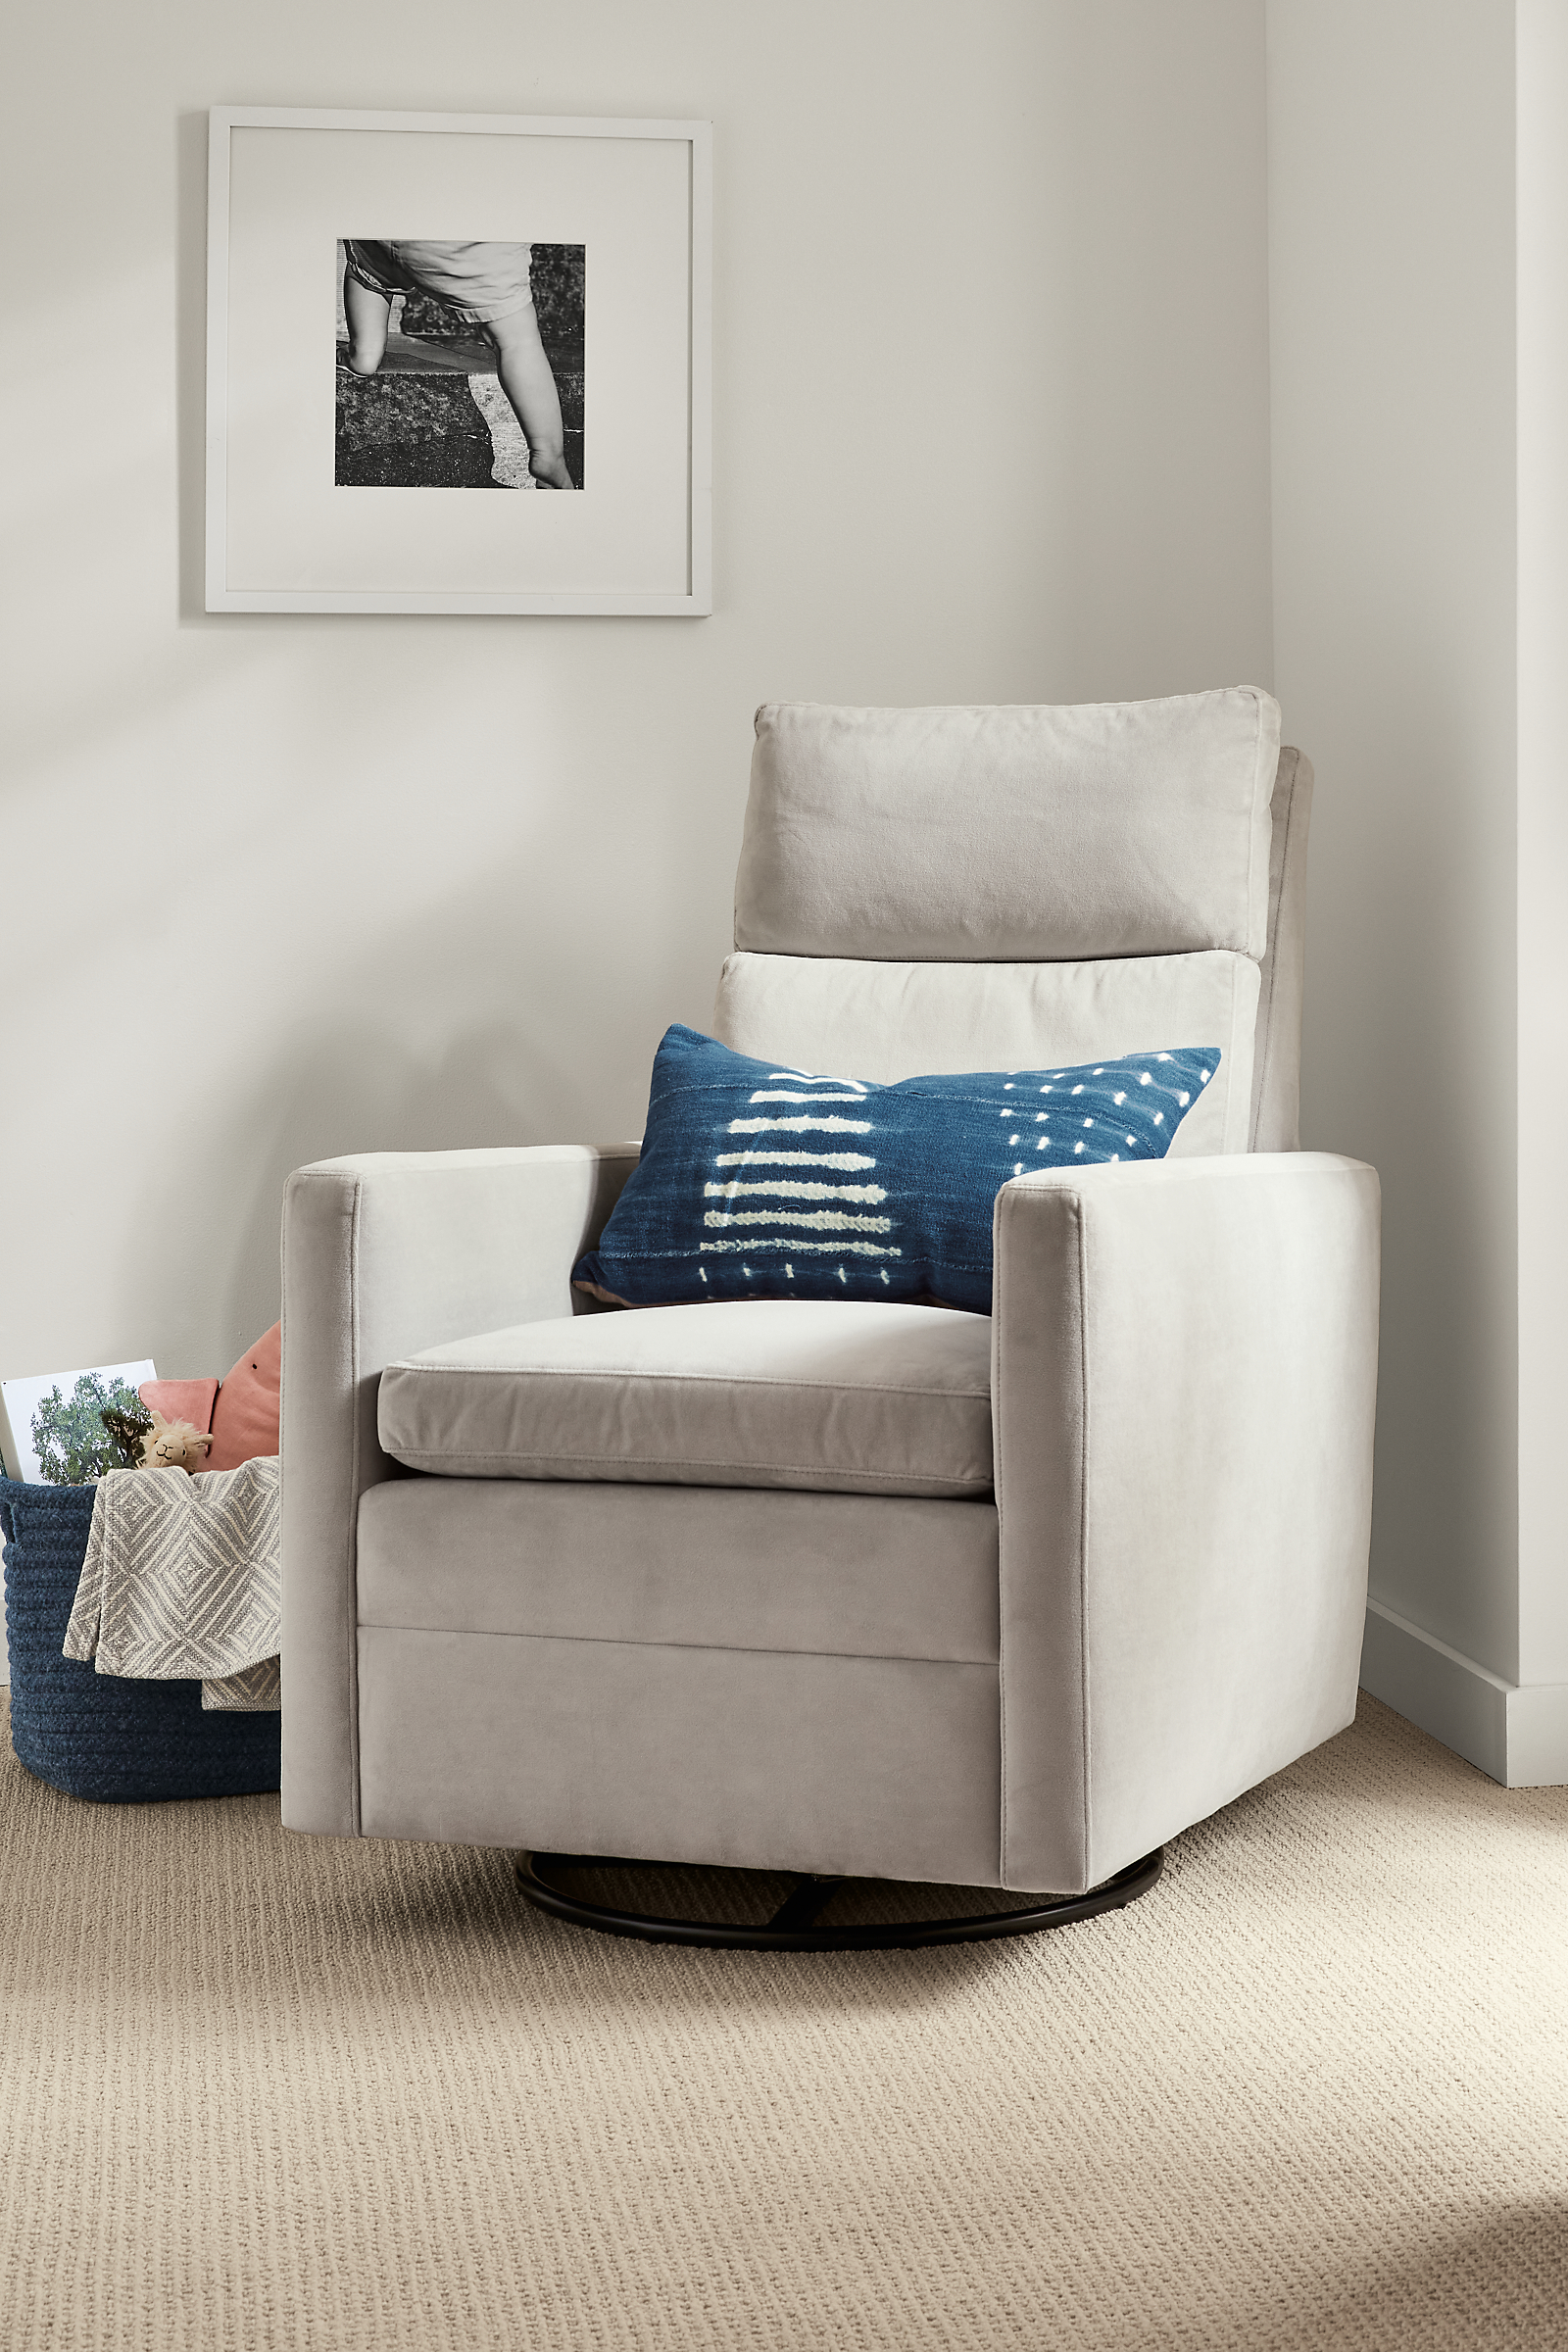 Ambry Swivel Glider in View Grey with Gouro Throw Pillow in Indigo.